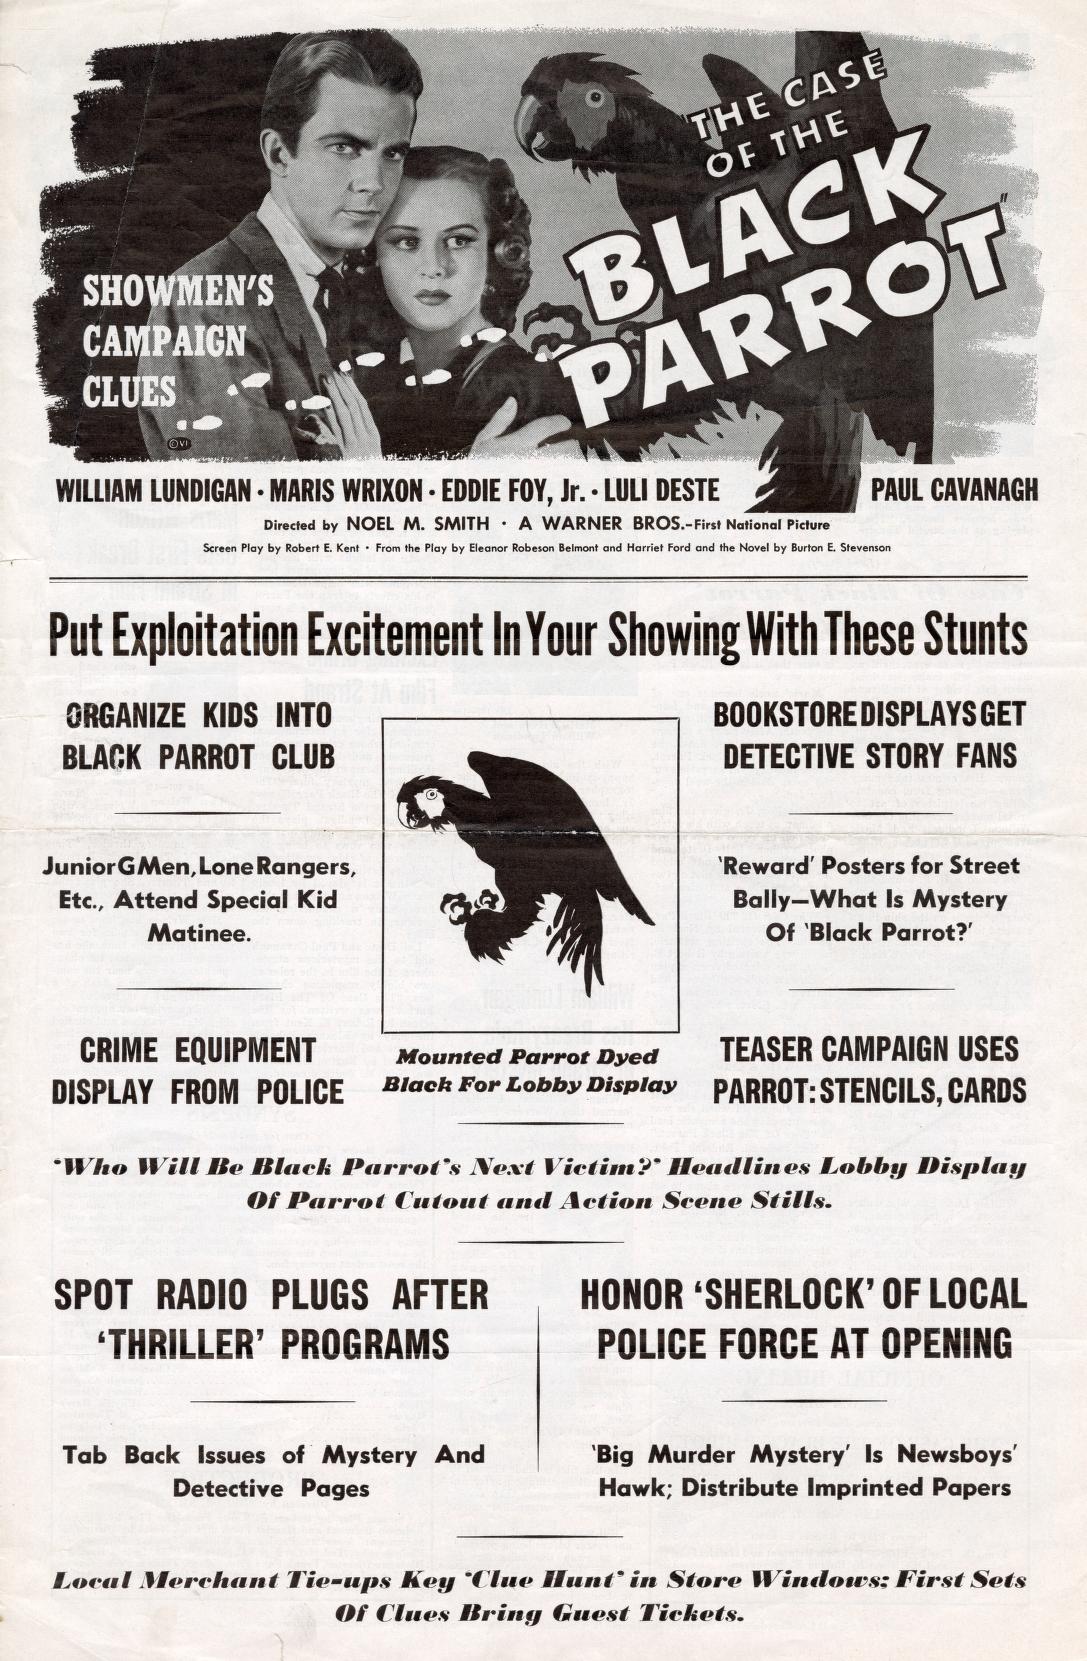 The Case of the Black Parrot (Warner Bros.)